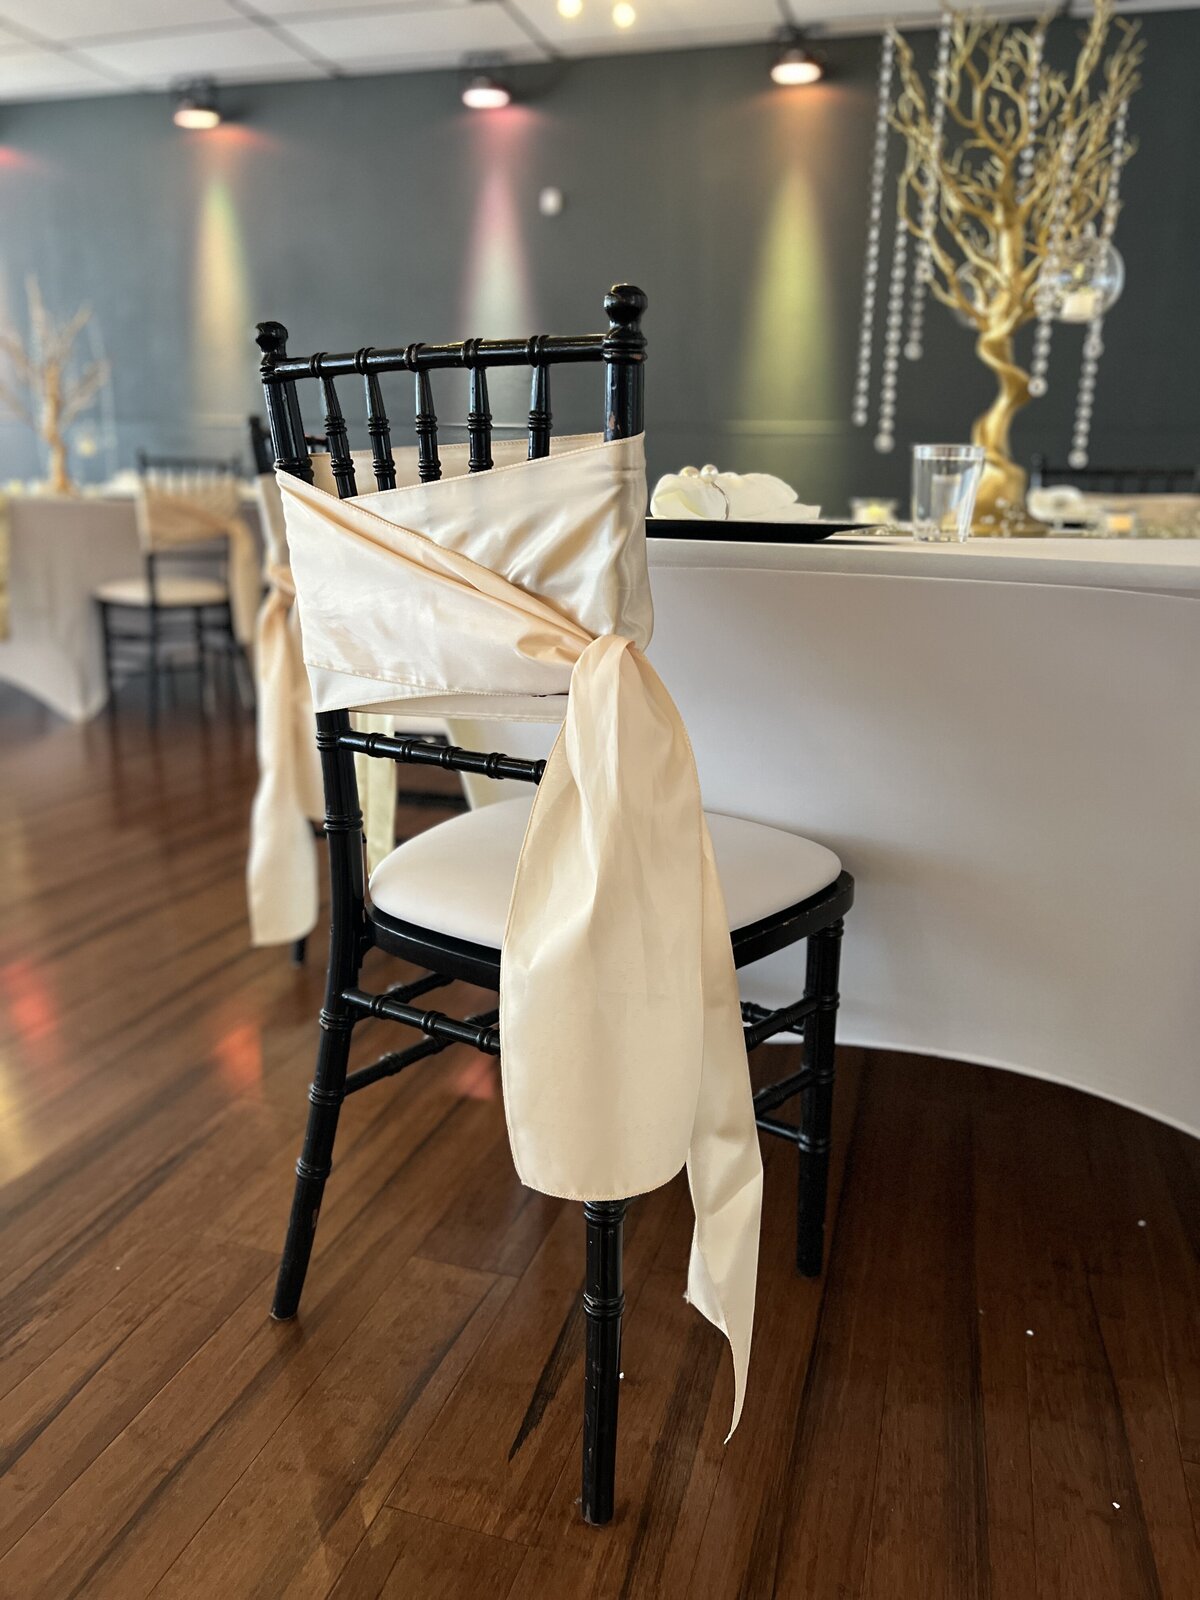 Black Chiavari chair with elegant champagne chair sash, creating a dreamy atmosphere for a Florida wedding - Perfect blend of sophistication and charm